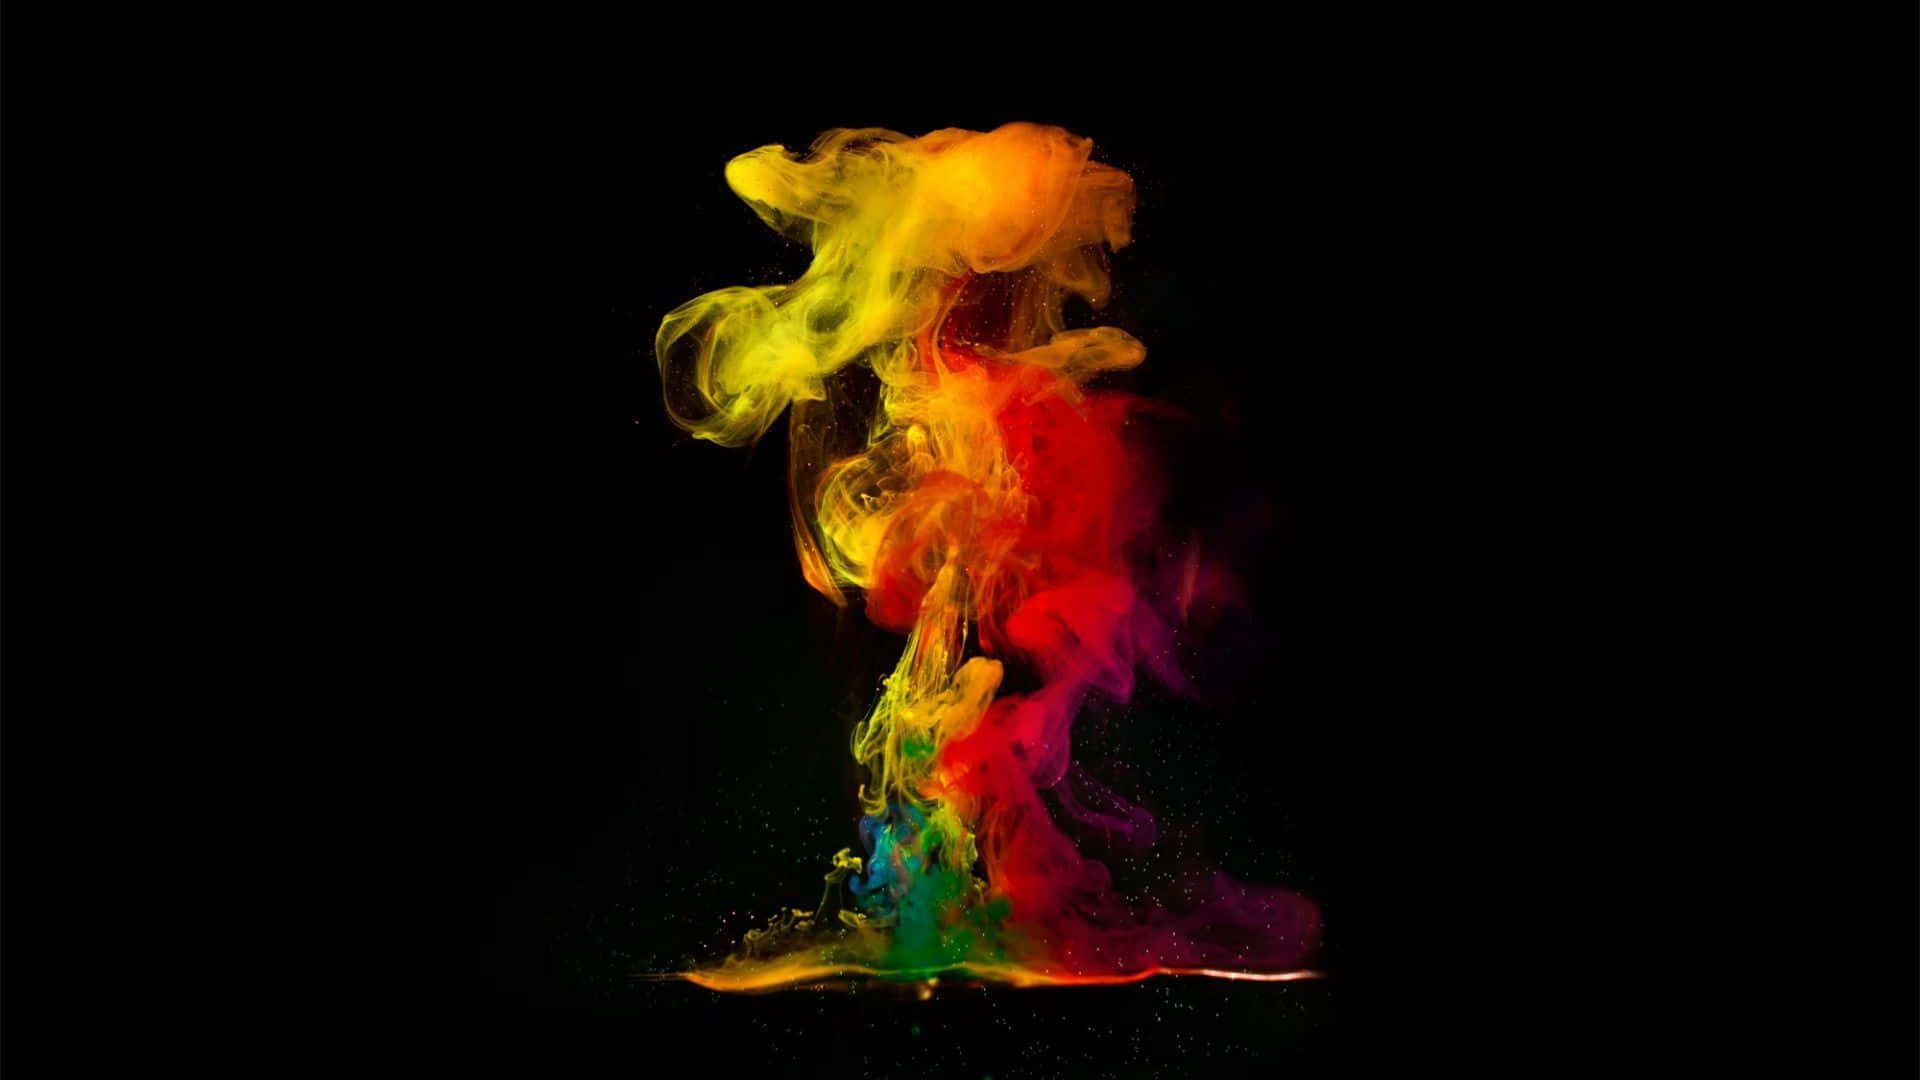 A Colorful Powder Is Thrown Into The Air